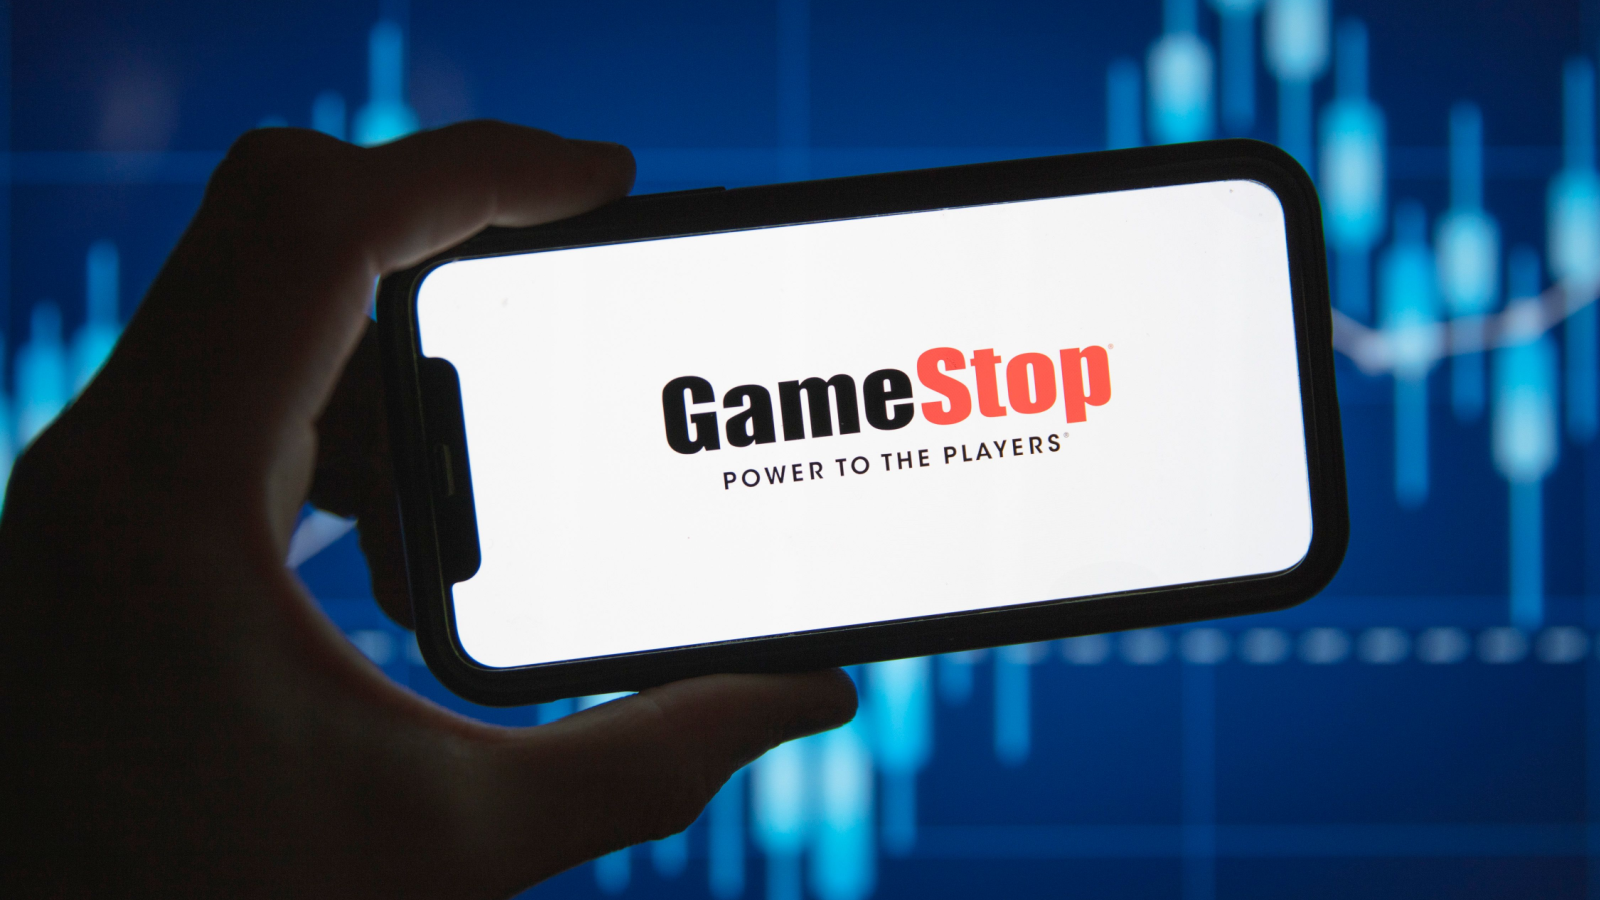 GameStop Stock Is Proof the Fed Must Raise Rates Again